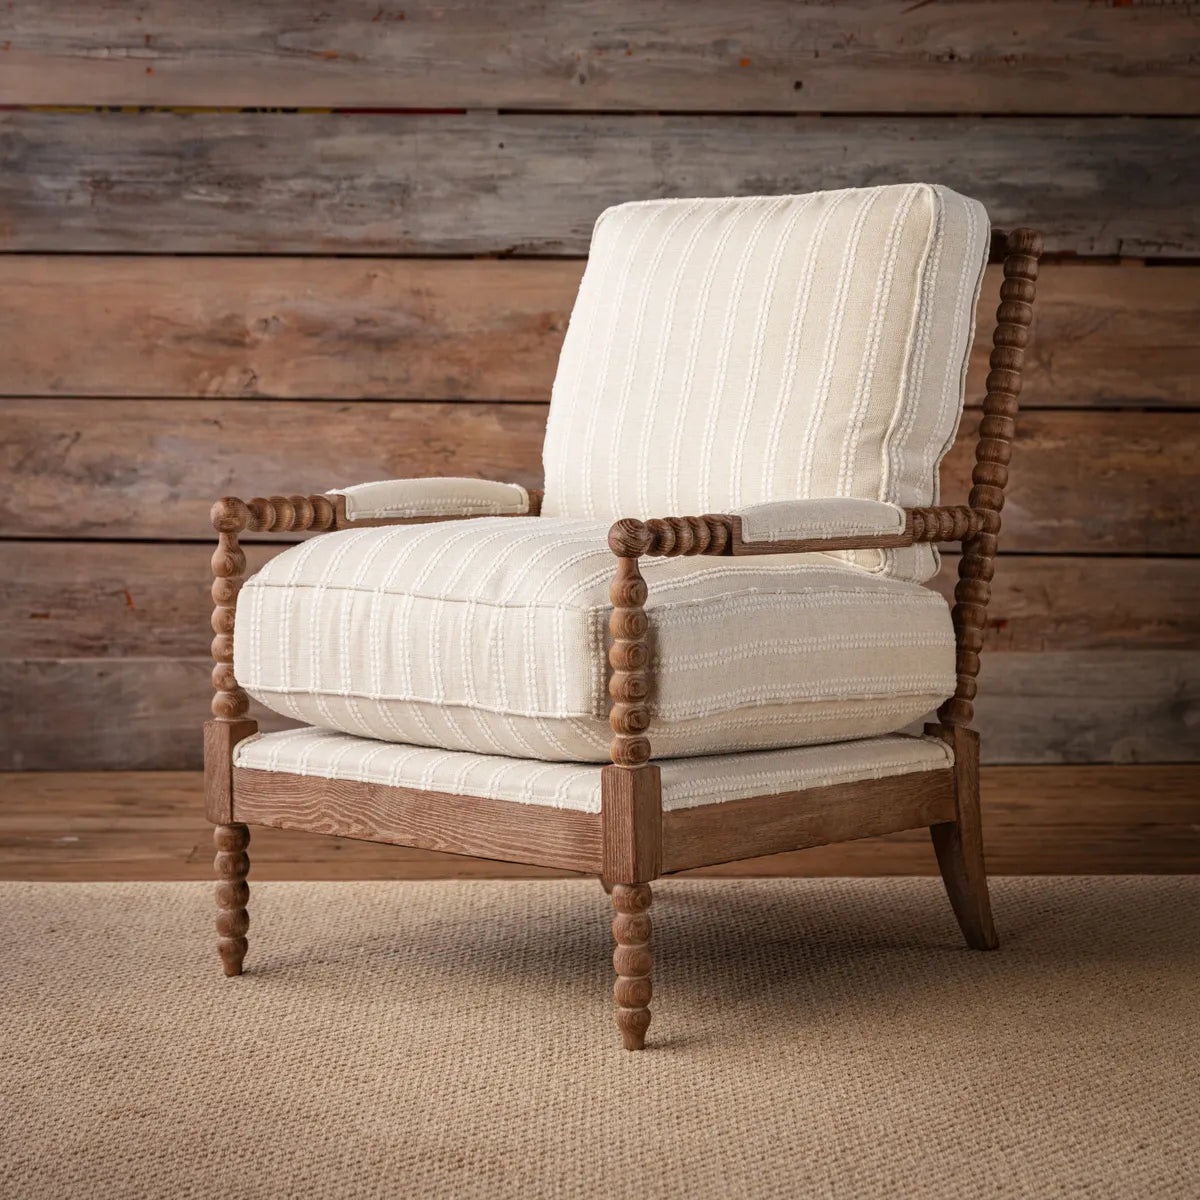 Colorado Spool Chair THE ALLEY EXCHANGE, SPOOL LEGGED ACCENT CHAIR FOR SALE